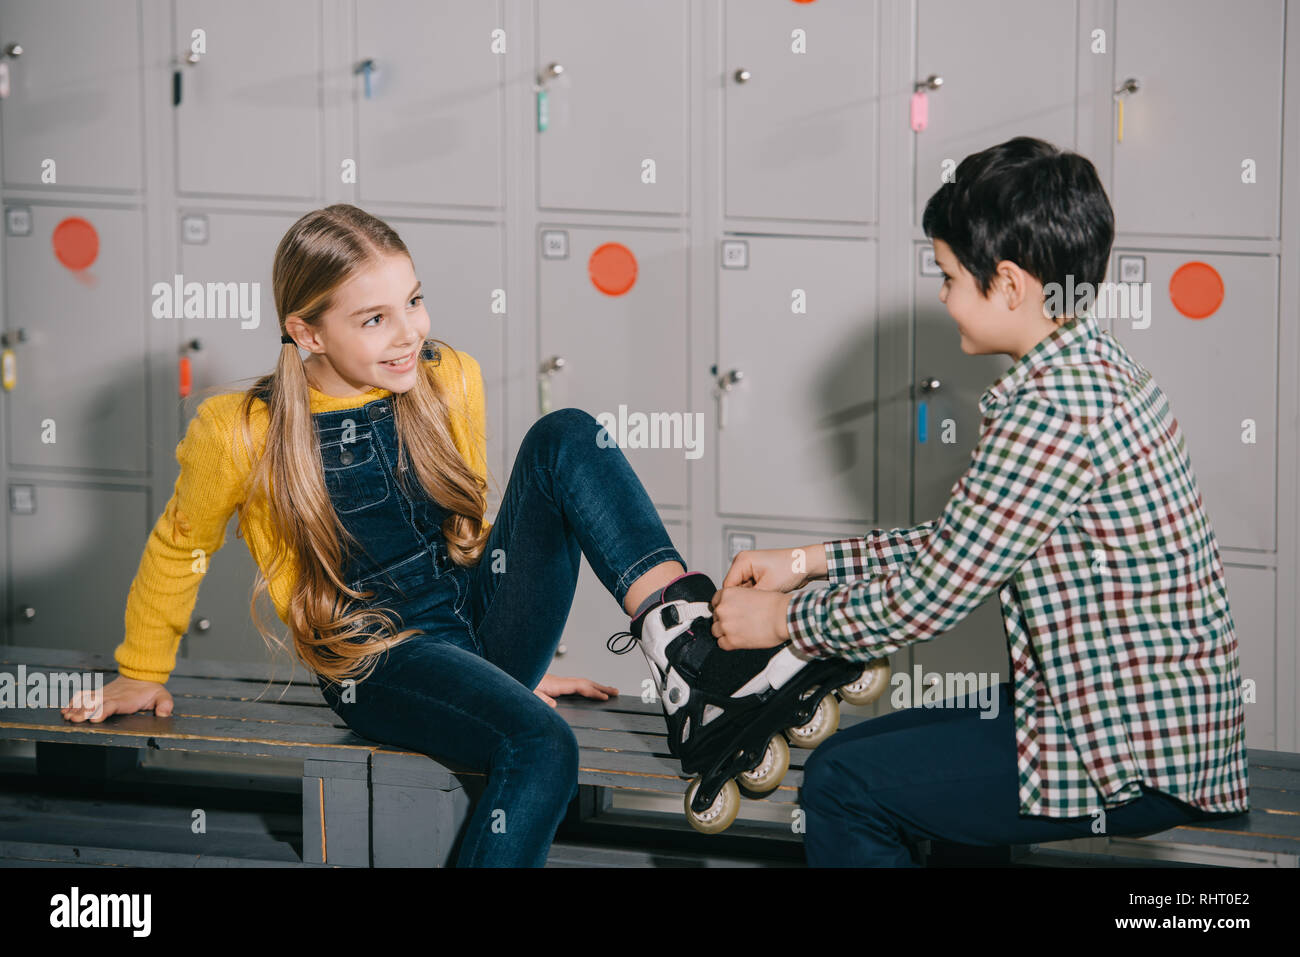 Kid in checkered shirt helps friend to putting on roller skates Stock Photo